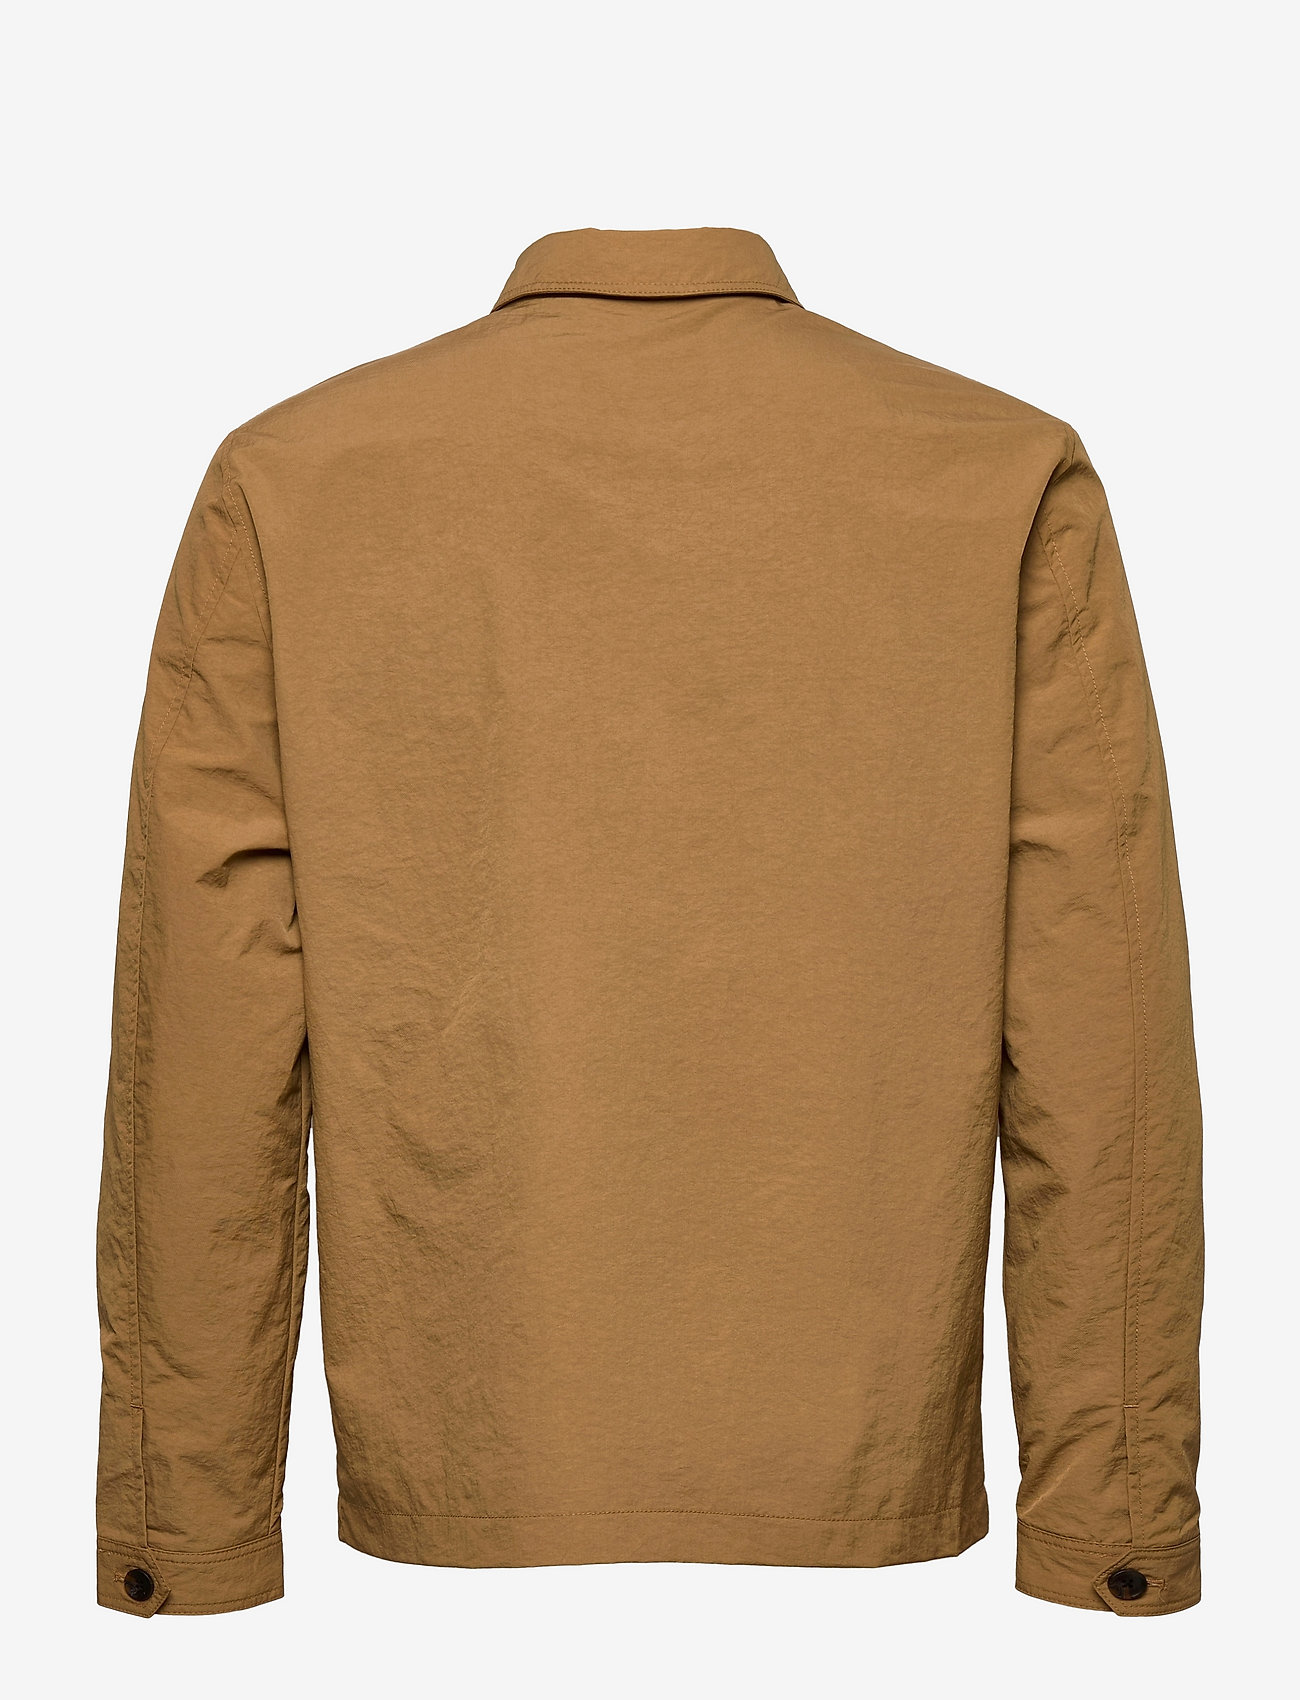 Esprit Casual - Recycled: safari jacket with mesh lining - mehed - camel 2 - 1